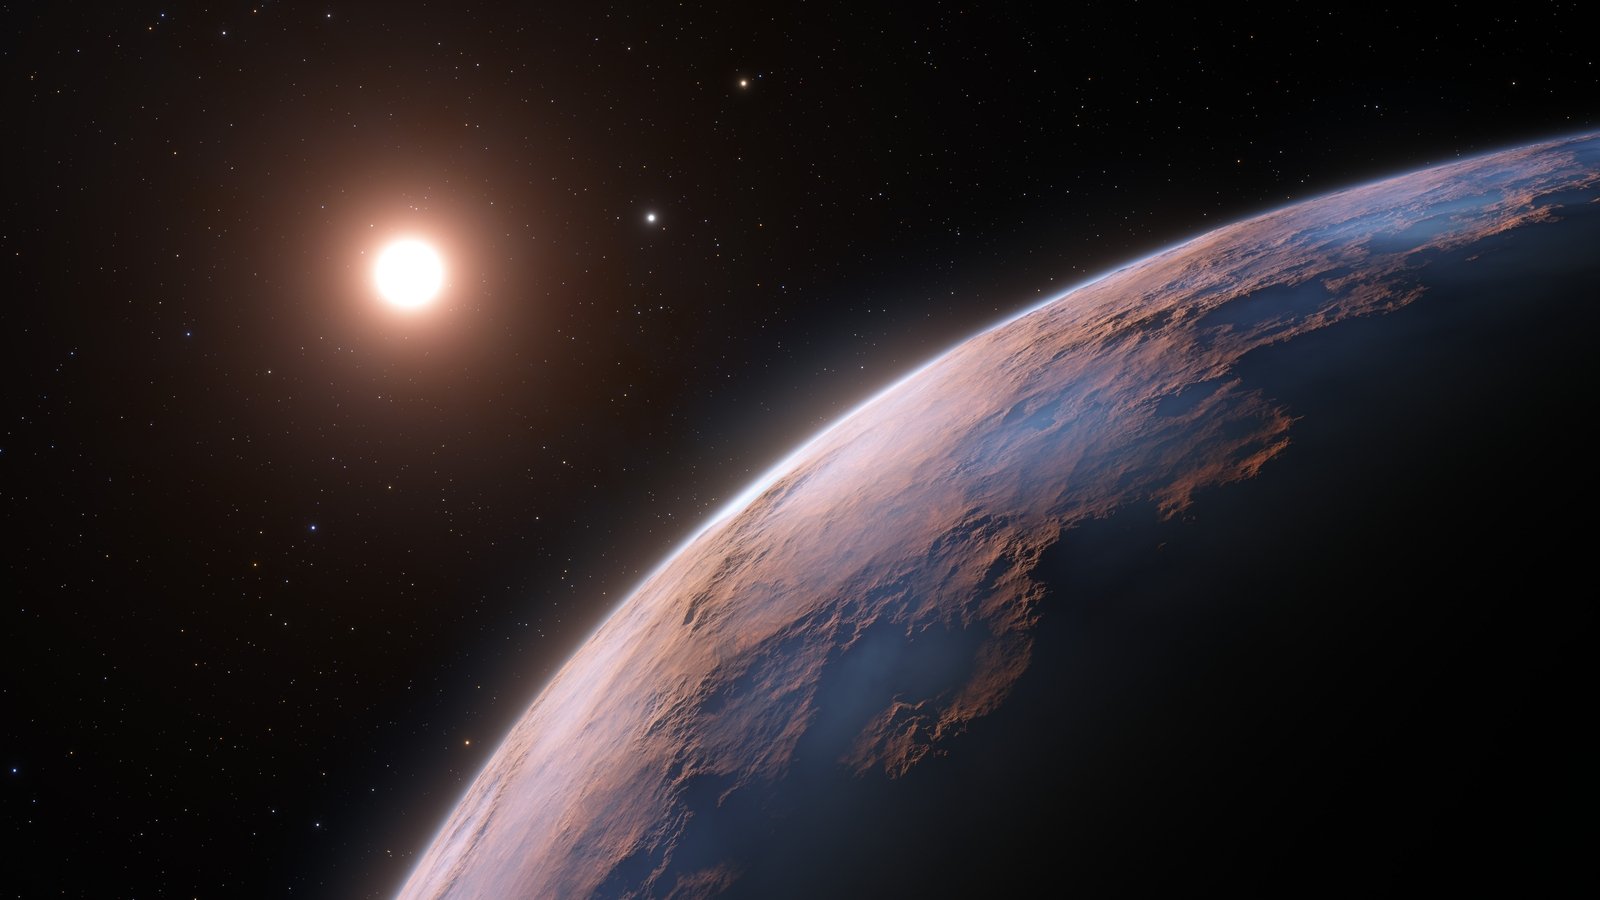 Scientists Discover New Planet "Proxima d" Orbiting the Nearest Star to the Sun